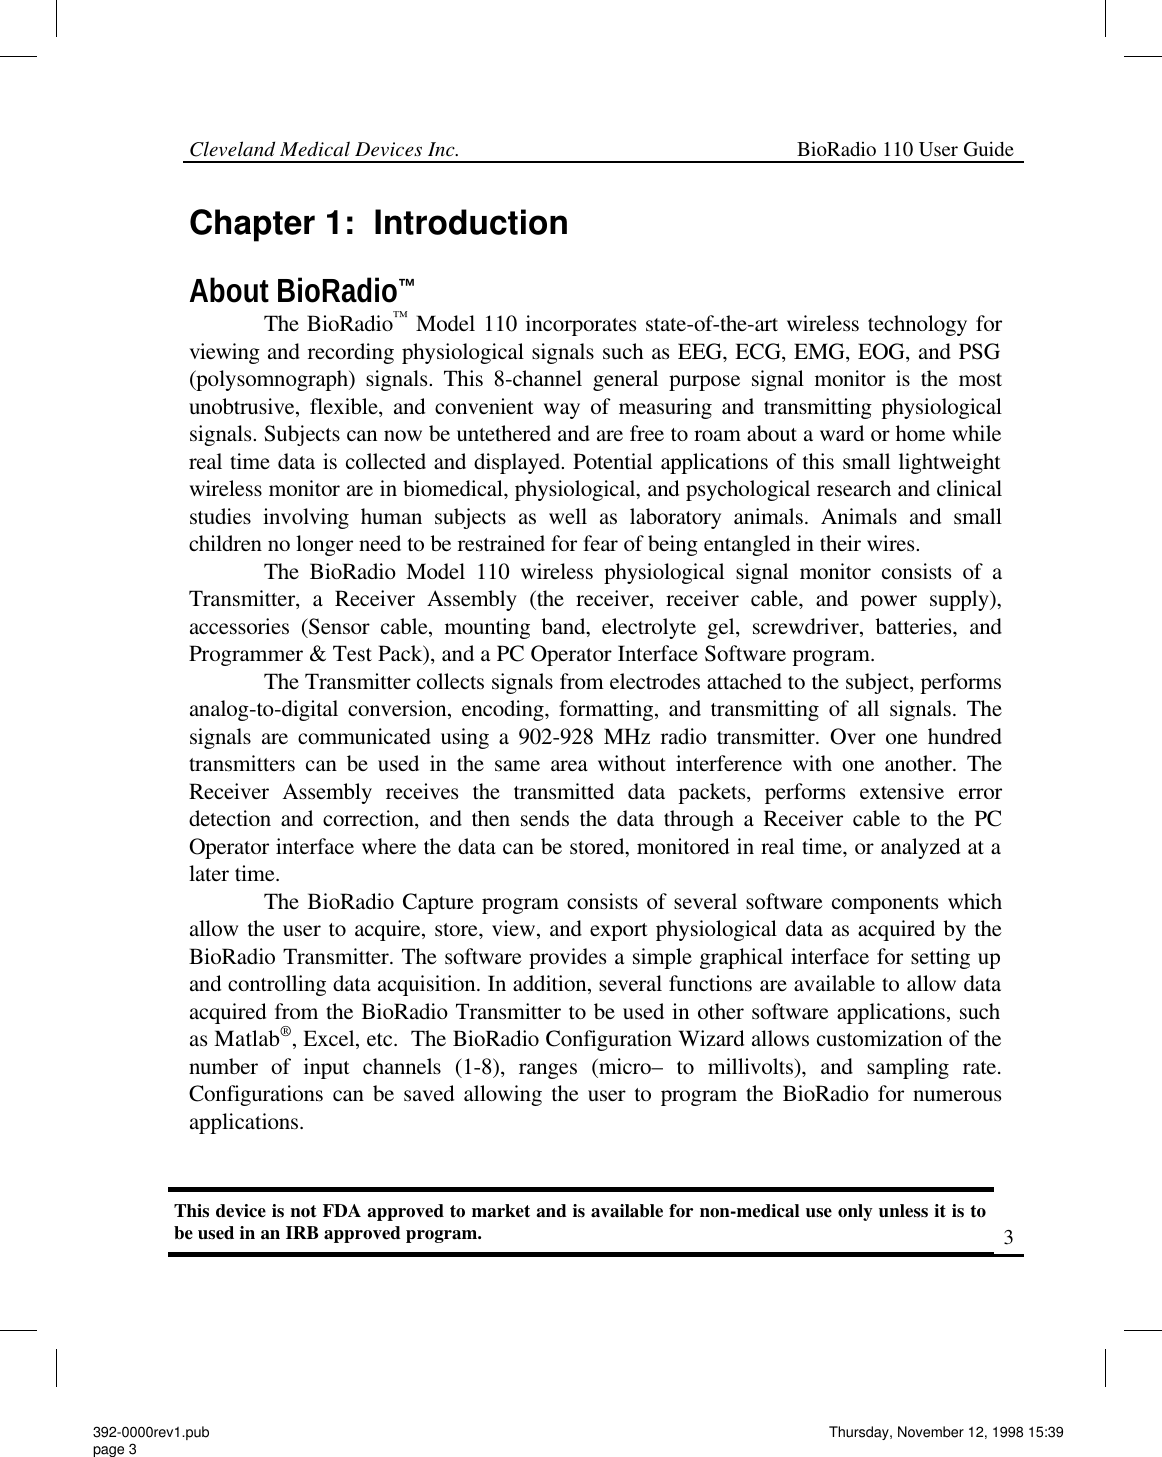 Cleveland Medical Devices Inc.                                                             BioRadio 110 User Guide                                                                                                                                                     3 Chapter 1:  Introduction  About BioRadio™              The BioRadio™ Model 110 incorporates state-of-the-art wireless technology for viewing and recording physiological signals such as EEG, ECG, EMG, EOG, and PSG (polysomnograph) signals. This 8-channel general purpose signal monitor is the most unobtrusive, flexible, and convenient way of measuring and transmitting physiological signals. Subjects can now be untethered and are free to roam about a ward or home while real time data is collected and displayed. Potential applications of this small lightweight wireless monitor are in biomedical, physiological, and psychological research and clinical studies involving human subjects as well as laboratory animals. Animals and small children no longer need to be restrained for fear of being entangled in their wires.               The BioRadio Model 110 wireless physiological signal monitor consists of a Transmitter, a Receiver Assembly (the receiver, receiver cable, and power supply), accessories (Sensor cable, mounting band, electrolyte gel, screwdriver, batteries, and Programmer &amp; Test Pack), and a PC Operator Interface Software program.                 The Transmitter collects signals from electrodes attached to the subject, performs analog-to-digital conversion, encoding, formatting, and transmitting of all signals. The signals are communicated using a 902-928 MHz radio transmitter. Over one hundred transmitters can be used in the same area without interference with one another. The Receiver Assembly receives the transmitted data packets, performs extensive error detection and correction, and then sends the data through a Receiver cable to the PC Operator interface where the data can be stored, monitored in real time, or analyzed at a later time.              The BioRadio Capture program consists of several software components which allow the user to acquire, store, view, and export physiological data as acquired by the BioRadio Transmitter. The software provides a simple graphical interface for setting up and controlling data acquisition. In addition, several functions are available to allow data acquired from the BioRadio Transmitter to be used in other software applications, such as Matlab®, Excel, etc.  The BioRadio Configuration Wizard allows customization of the number of input channels (1-8), ranges (micro– to millivolts), and sampling rate.  Configurations can be saved allowing the user to program the BioRadio for numerous applications. This device is not FDA approved to market and is available for non-medical use only unless it is to be used in an IRB approved program.   392-0000rev1.pub page 3 Thursday, November 12, 1998 15:39 